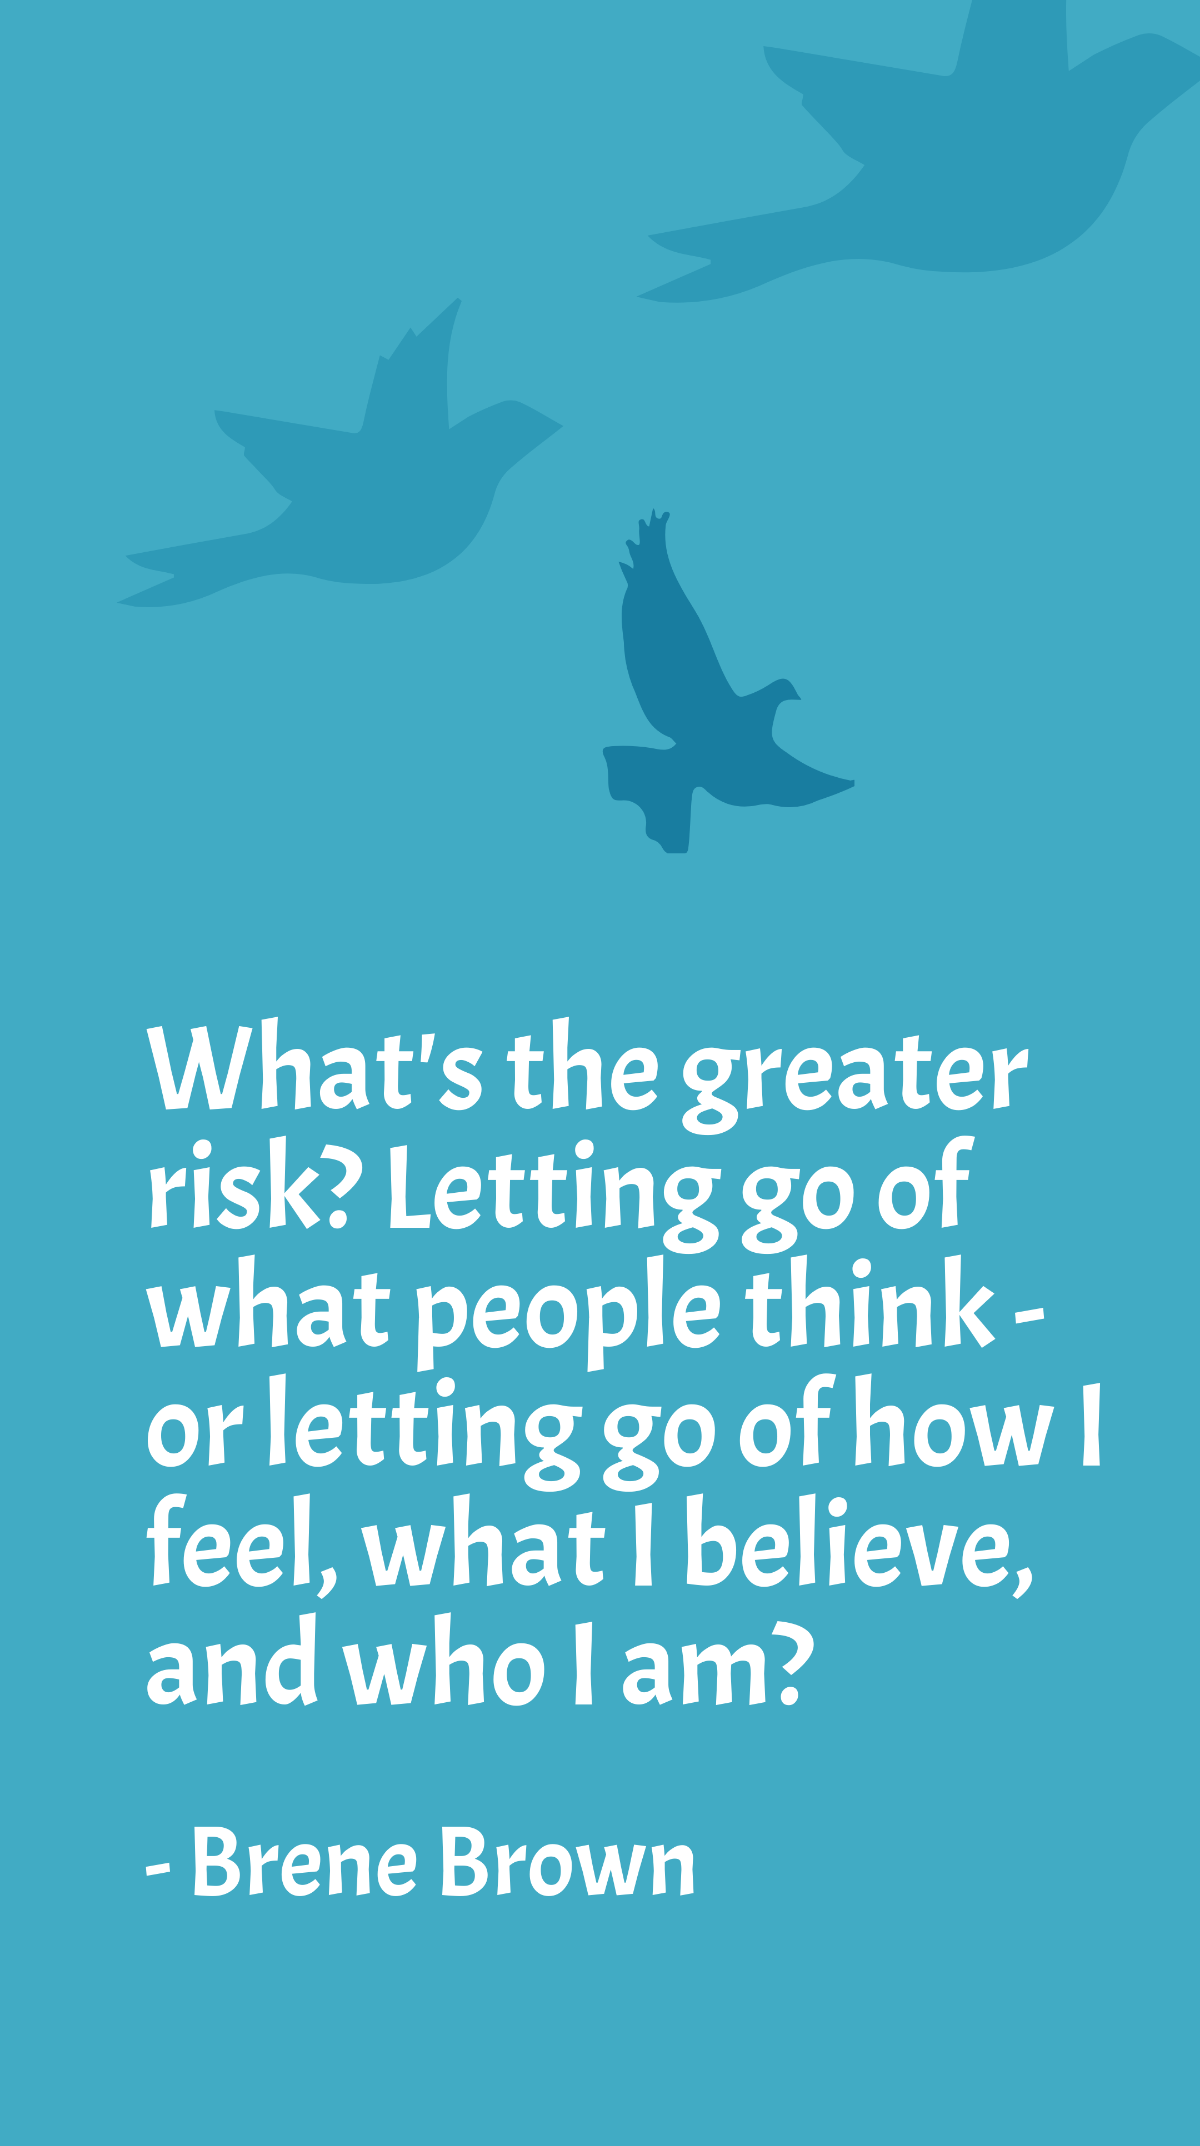 Free Brene Brown - What's the greater risk? Letting go of what people think - or letting go of how I feel, what I believe, and who I am? Template